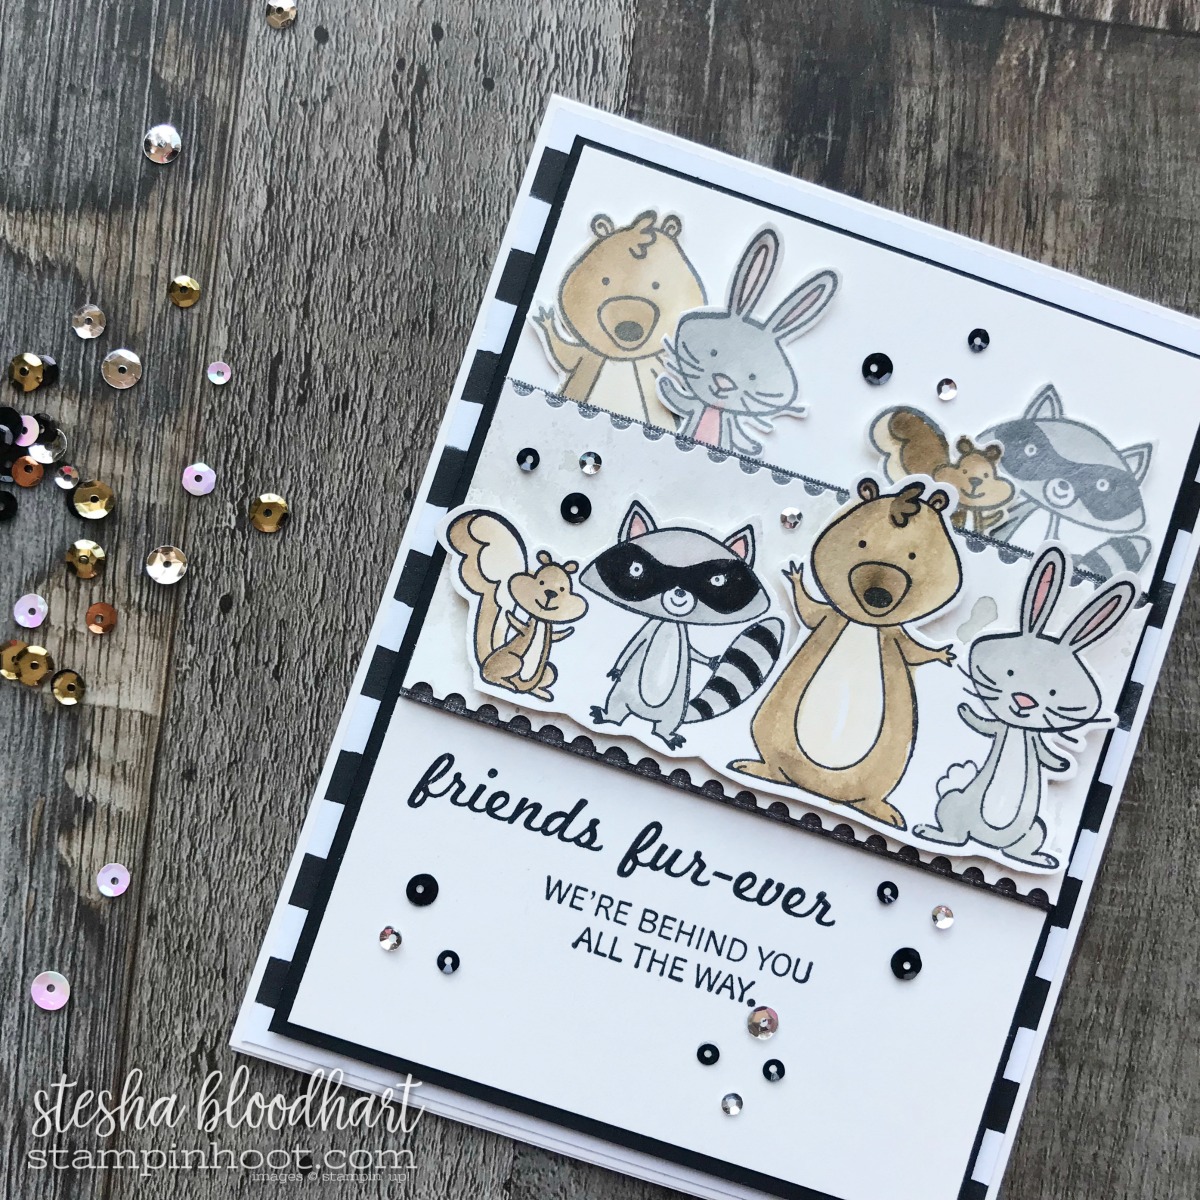 We Must Celebrate Stamp Set from Stampin' Up! 2018 Occasions Catalog for #tgifc143 Card Created by Stesha Bloodhart, Stampin' Hoot! #steshabloodhart #stampinhoot